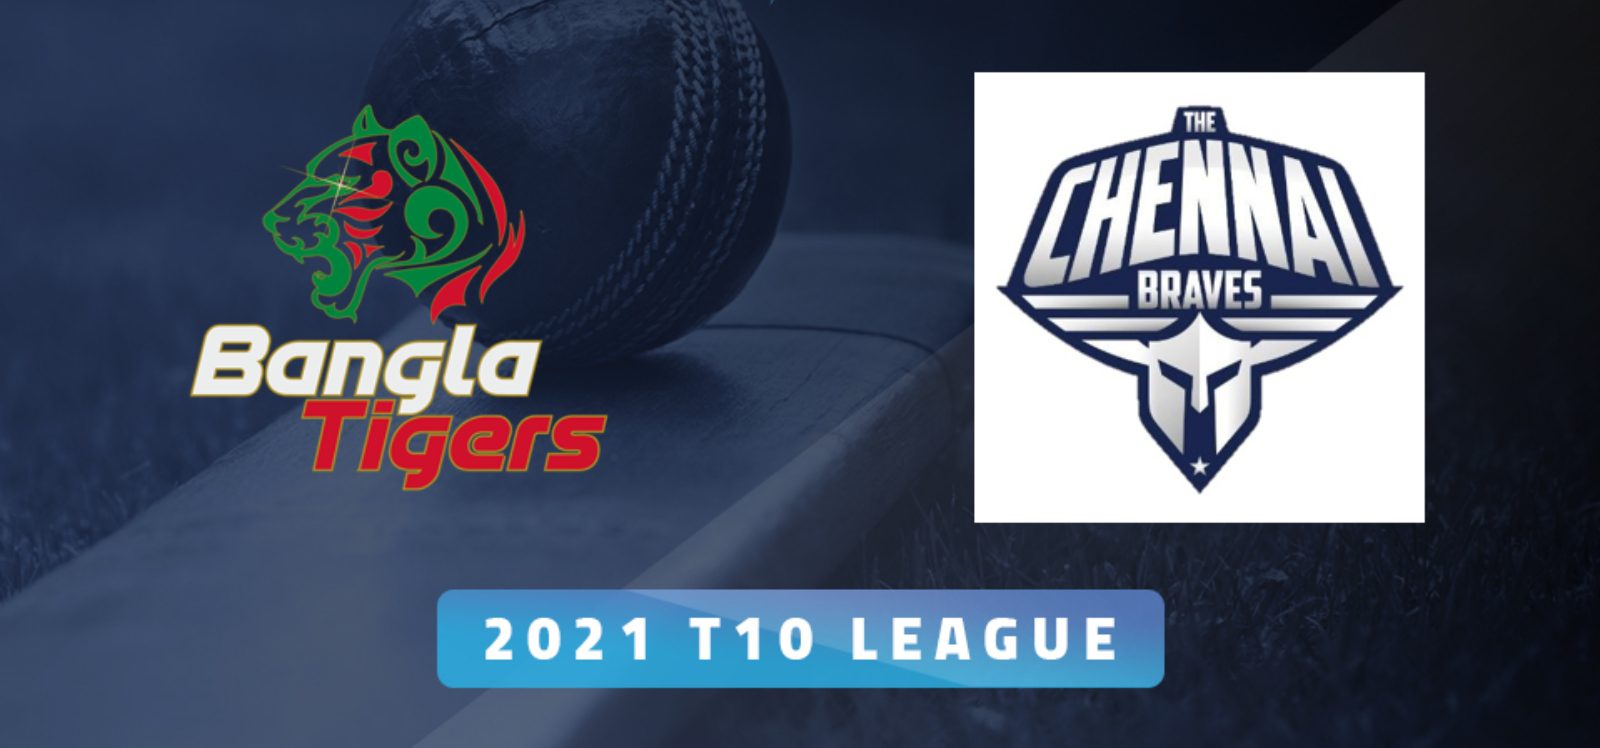 Abu Dhabi T10 LIVE: Preview, Squad News, Head to Head stats and Dream11 Prediction for Bangla Tigers vs The Chennai Braves - Match 12